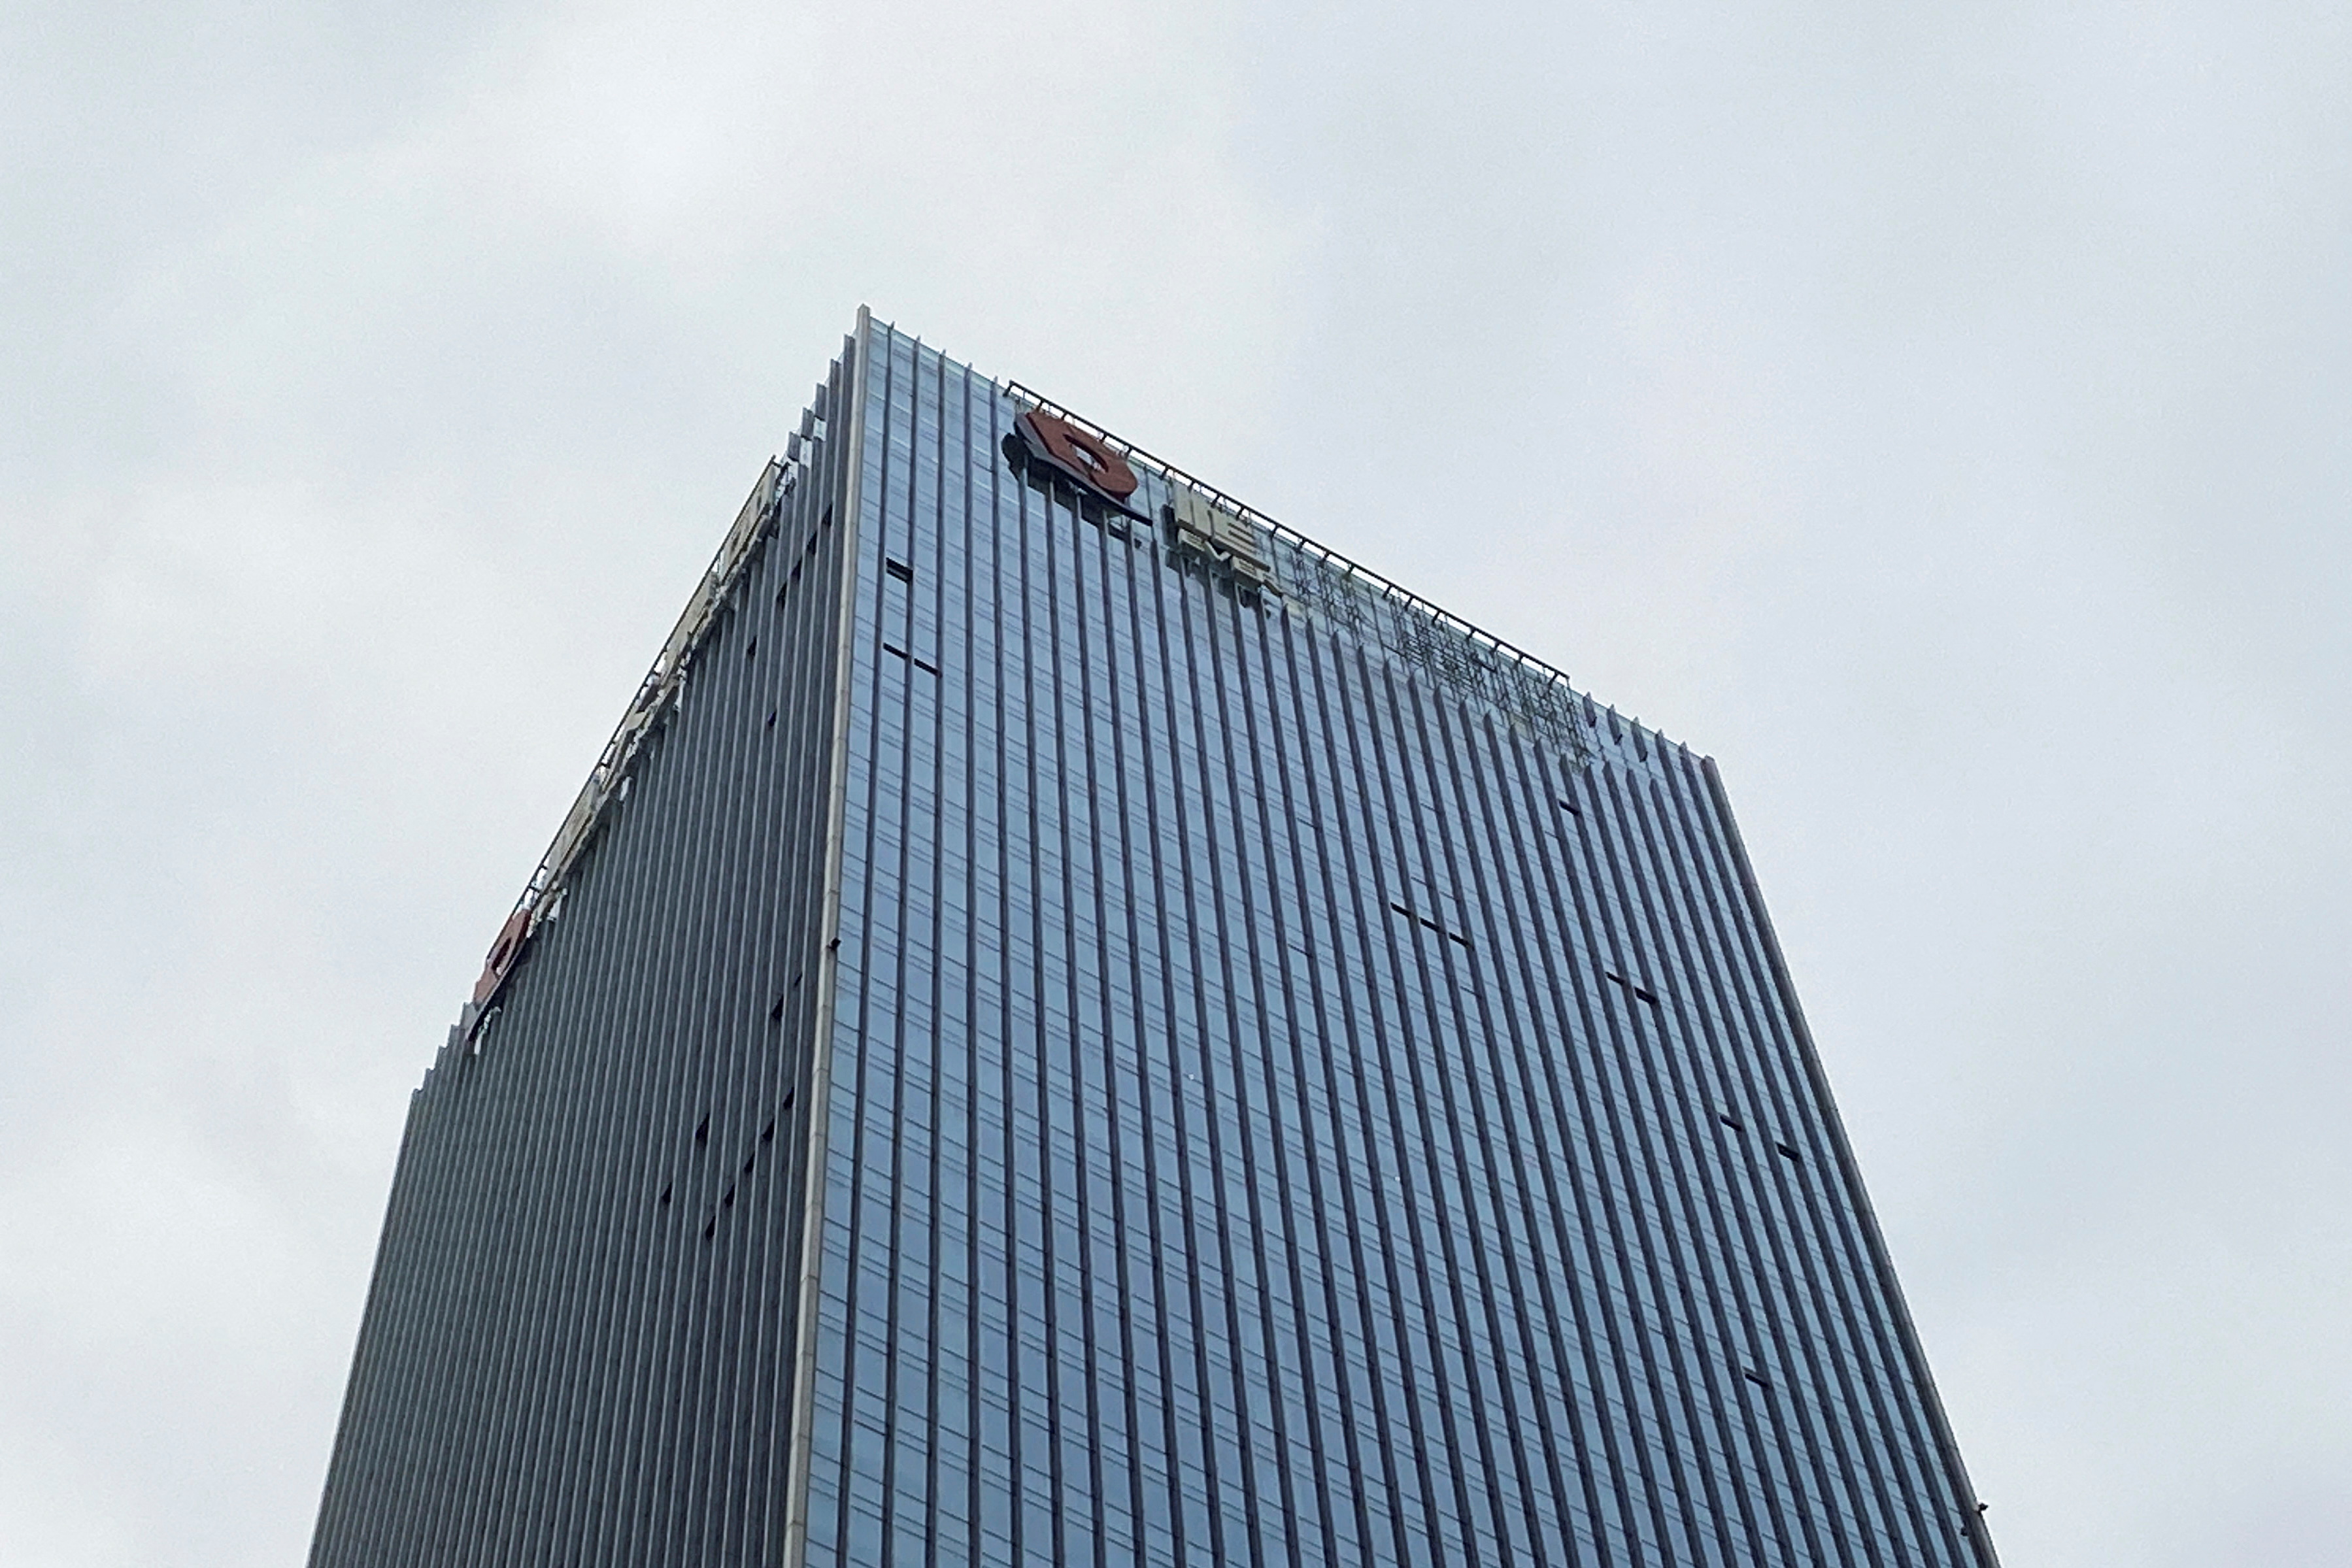 Partially removed company logo of China Evergrande Group in Shenzhen